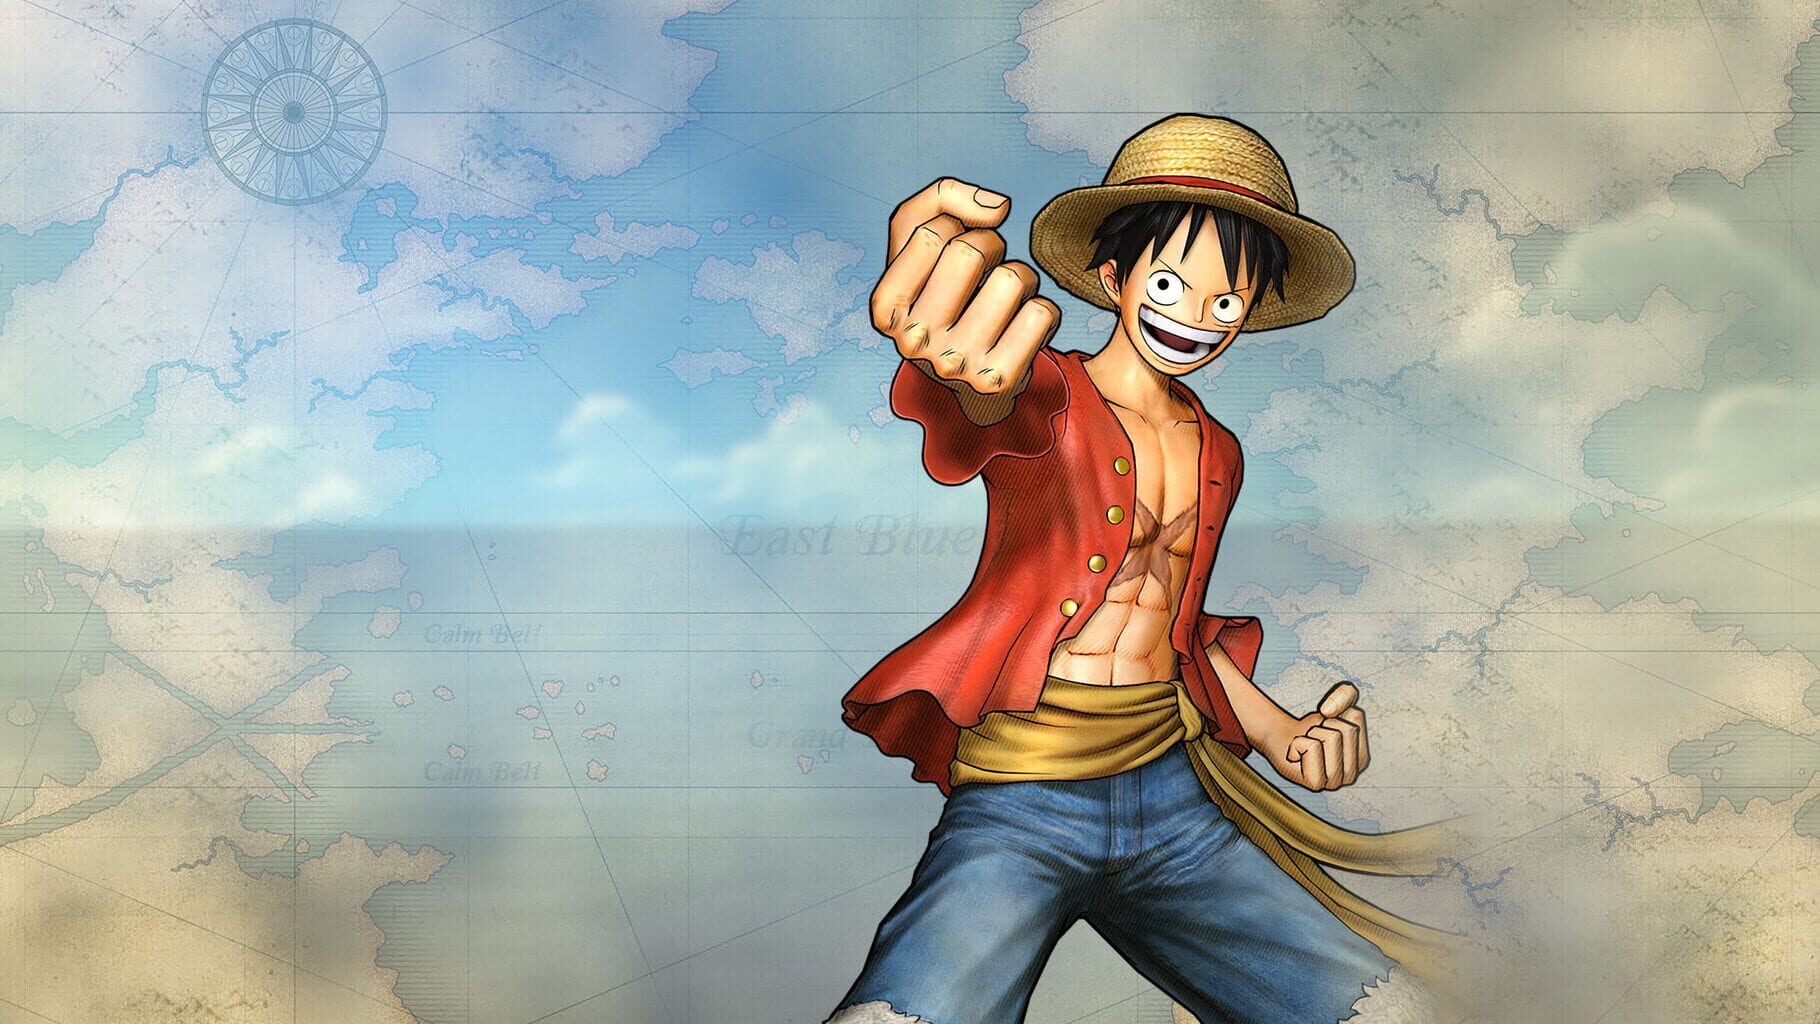 Artwork for One Piece: Pirate Warriors 3